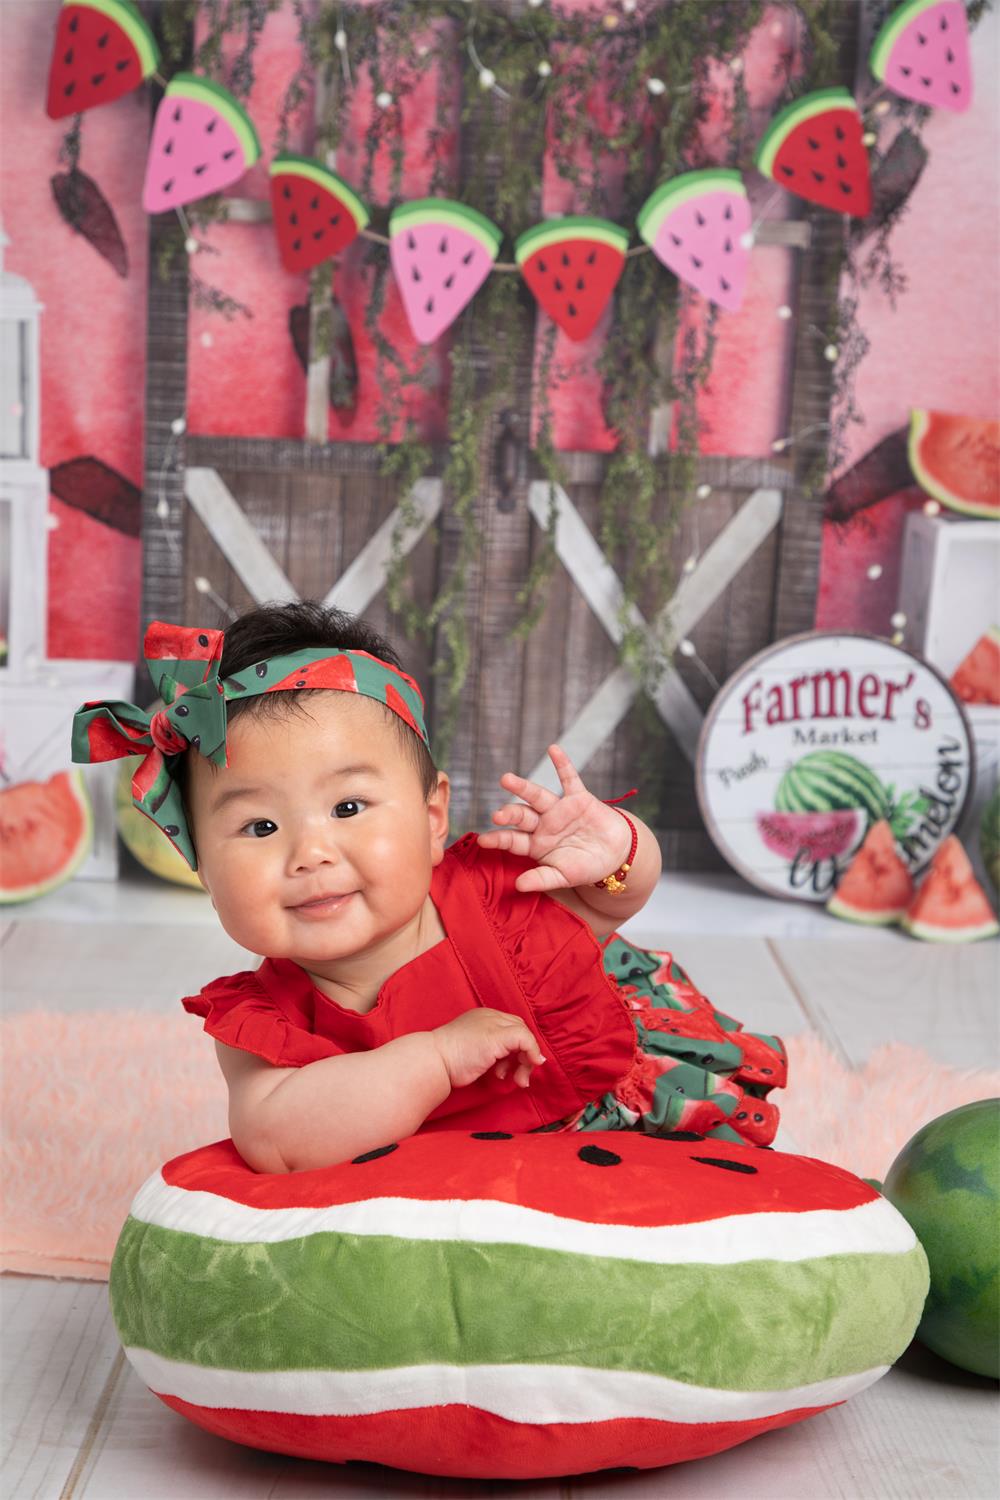 Kate Summer Watermelon Backdrop Designed by Mandy Ringe Photography